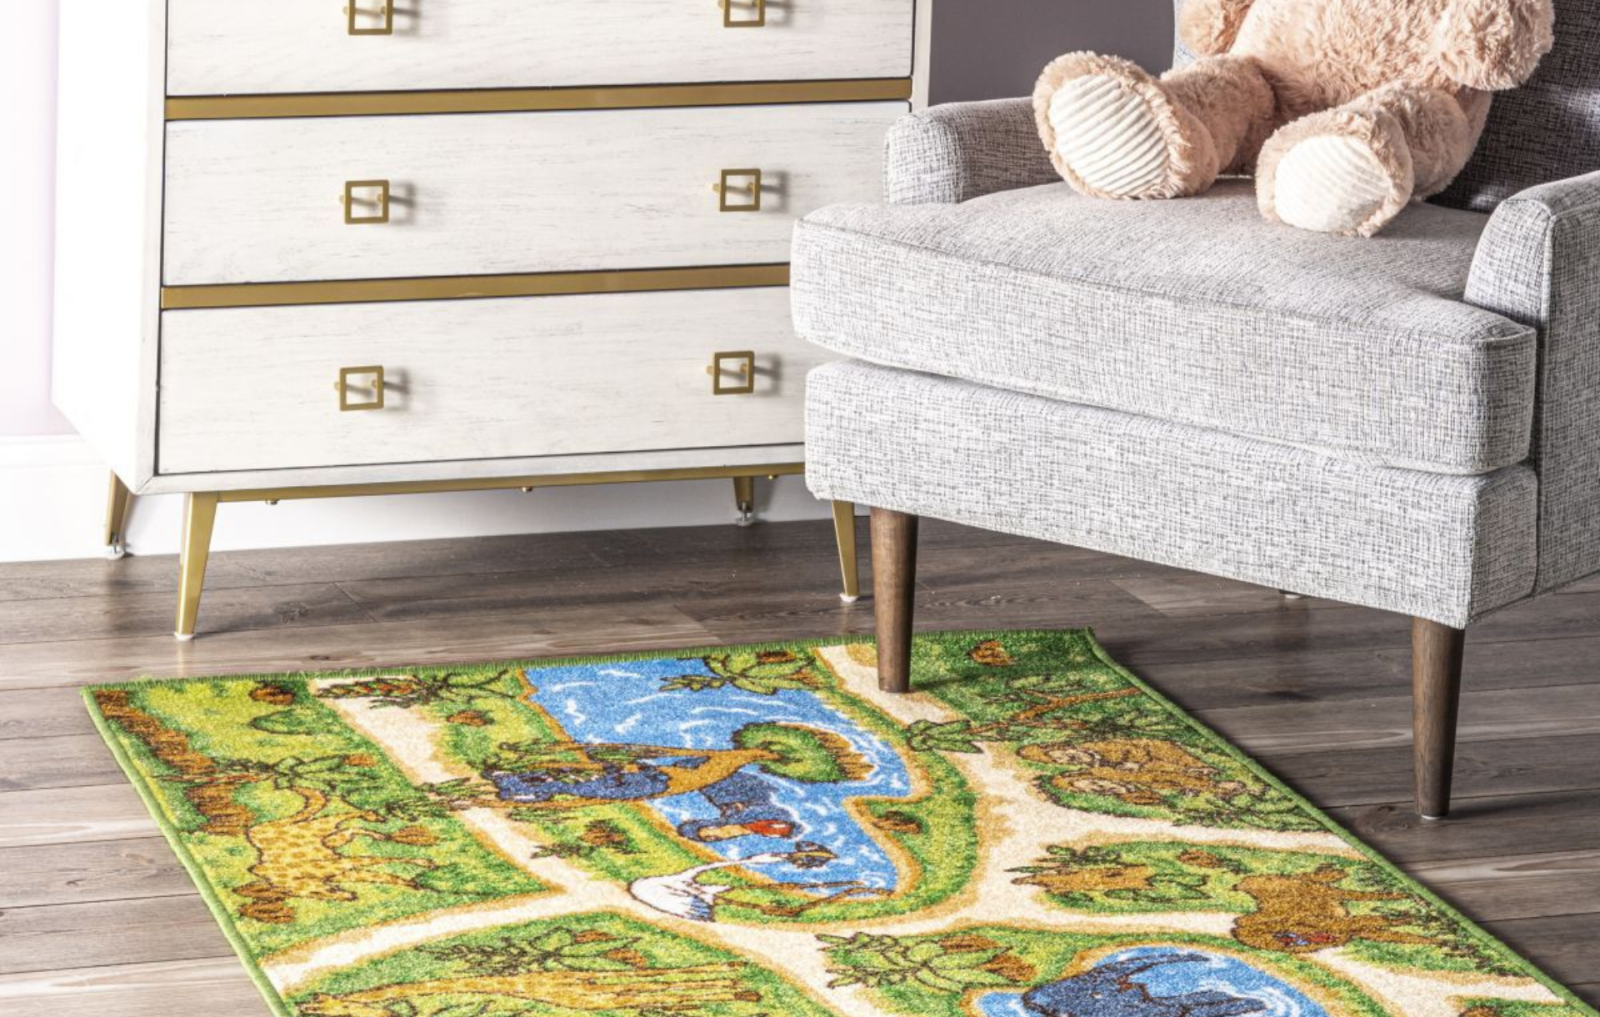 jungle-themed rug under chair